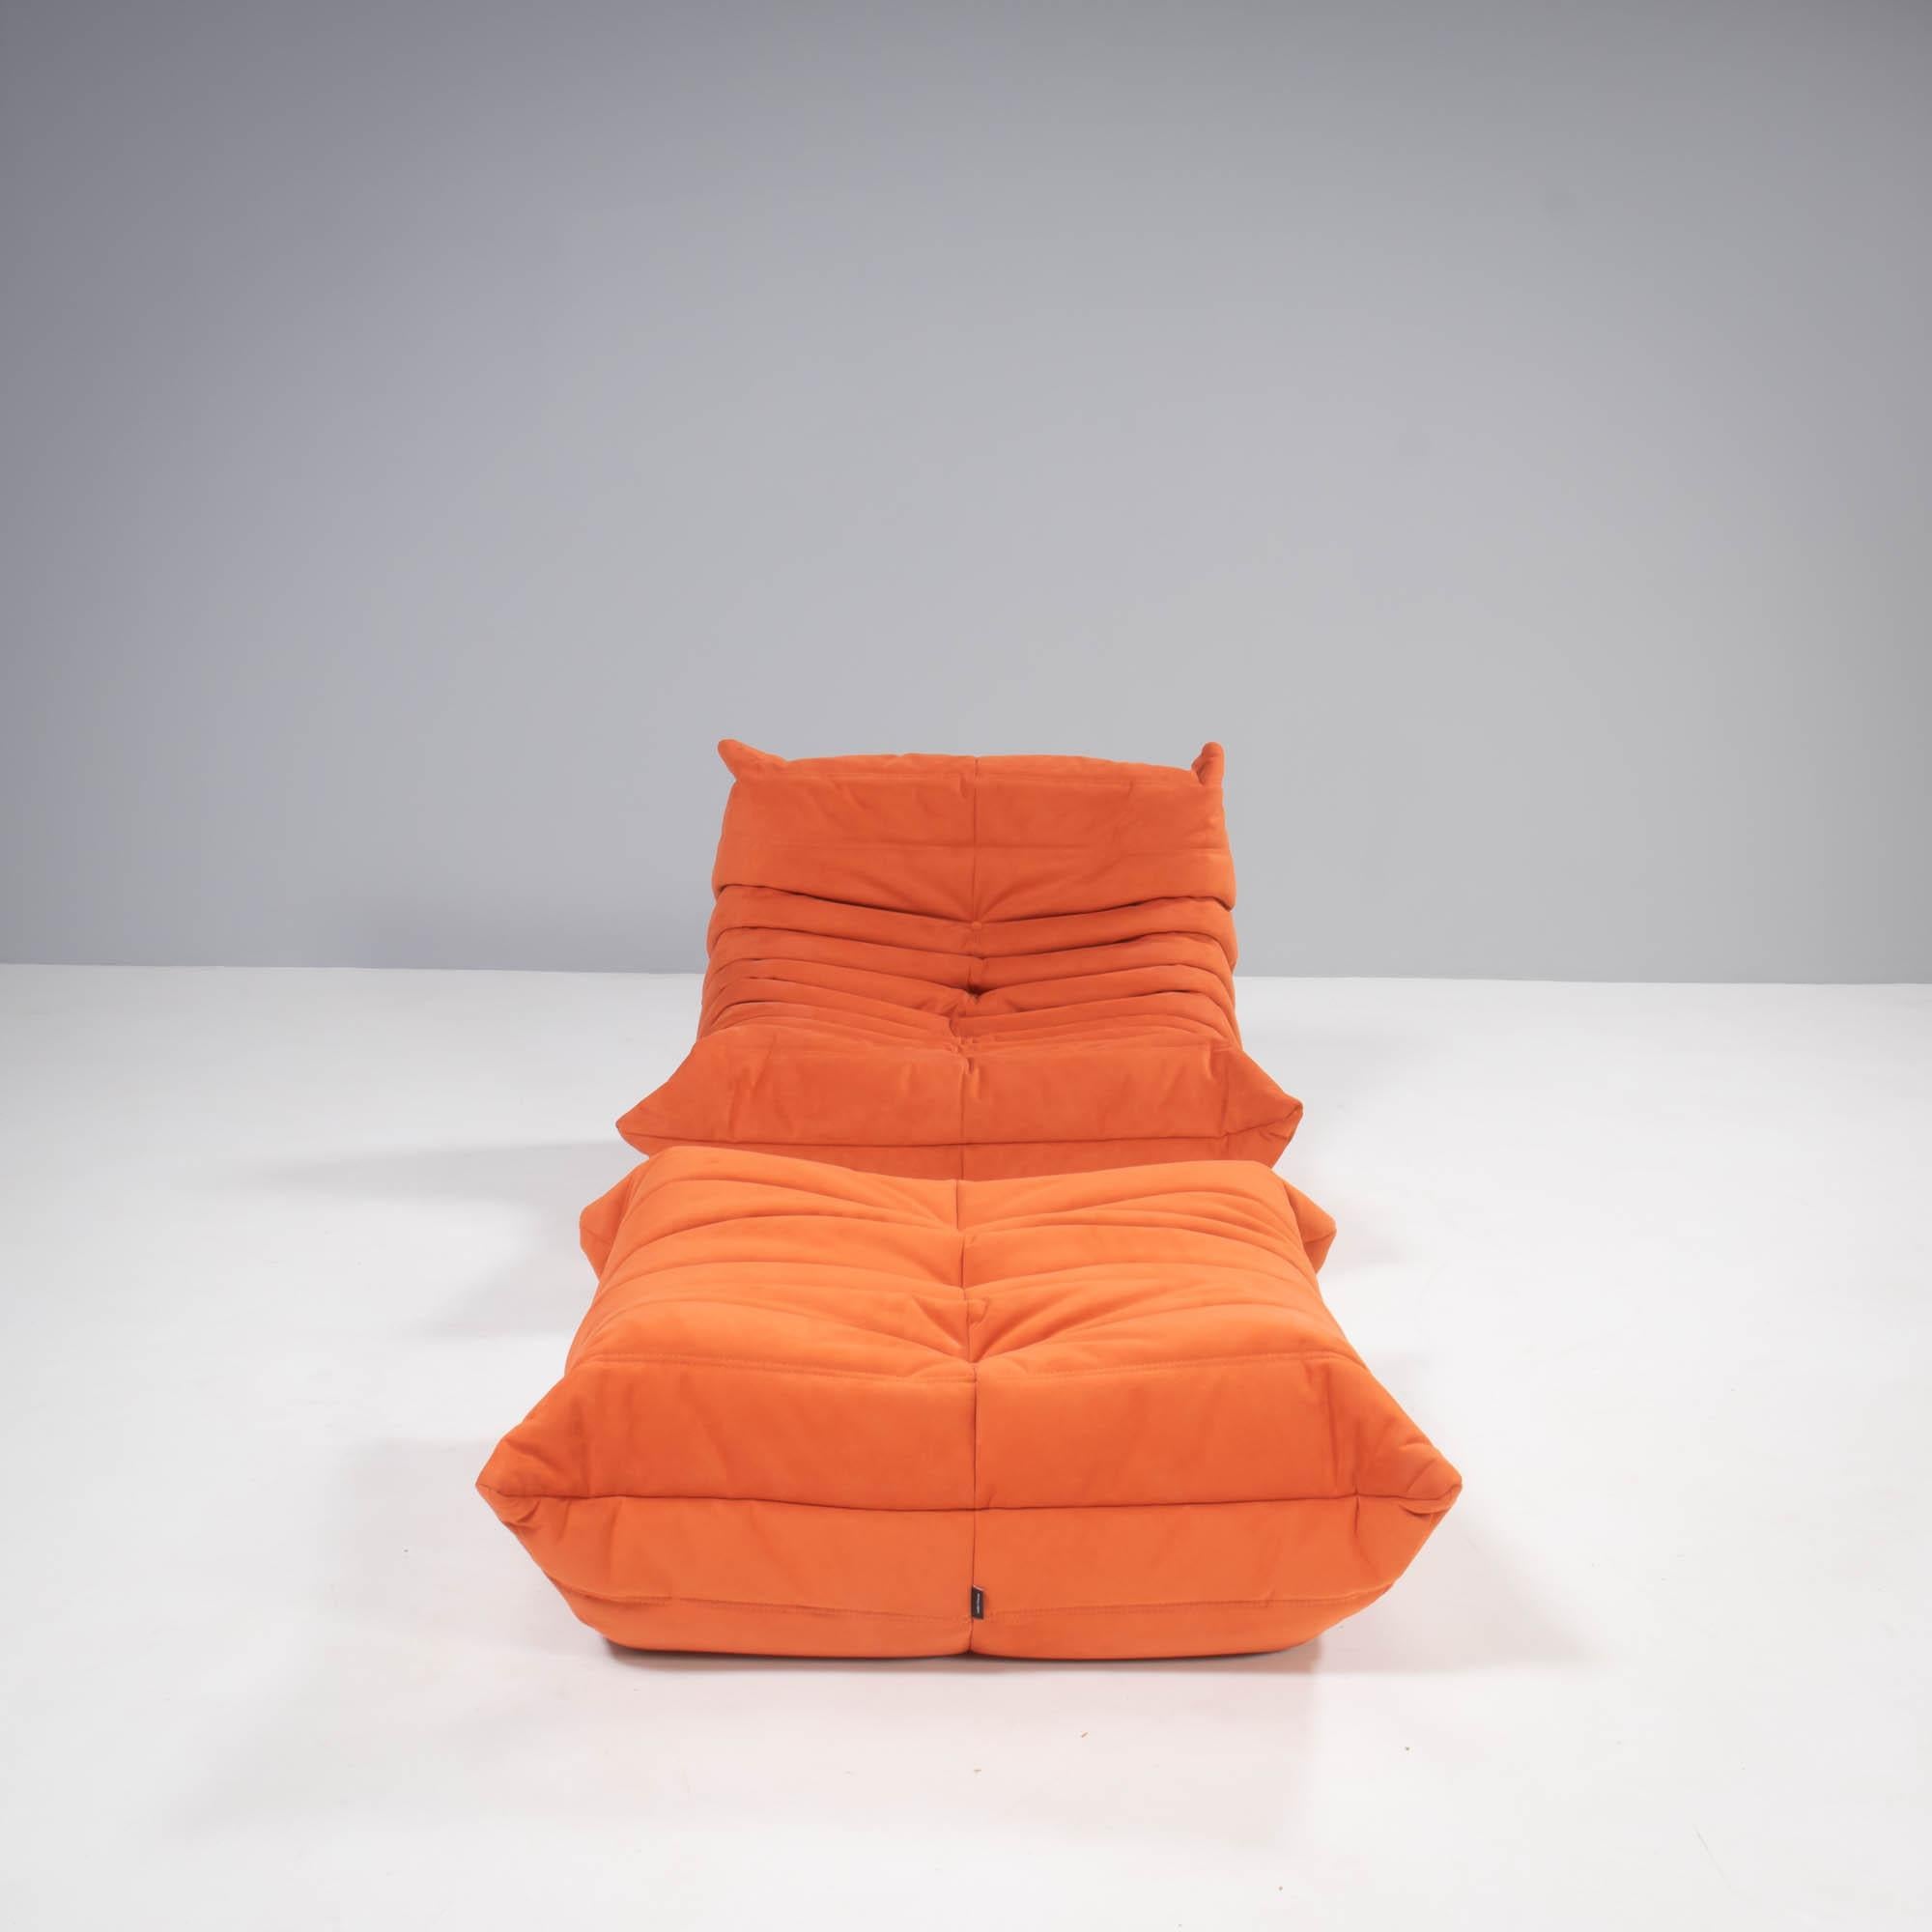 The iconic Togo orange sofa, originally designed by Michel Ducaroy for Ligne Roset in 1973, has become a mid-century design classic.

This fireside armchair and footstool is incredibly versatile and can be used alone or paired with other pieces from